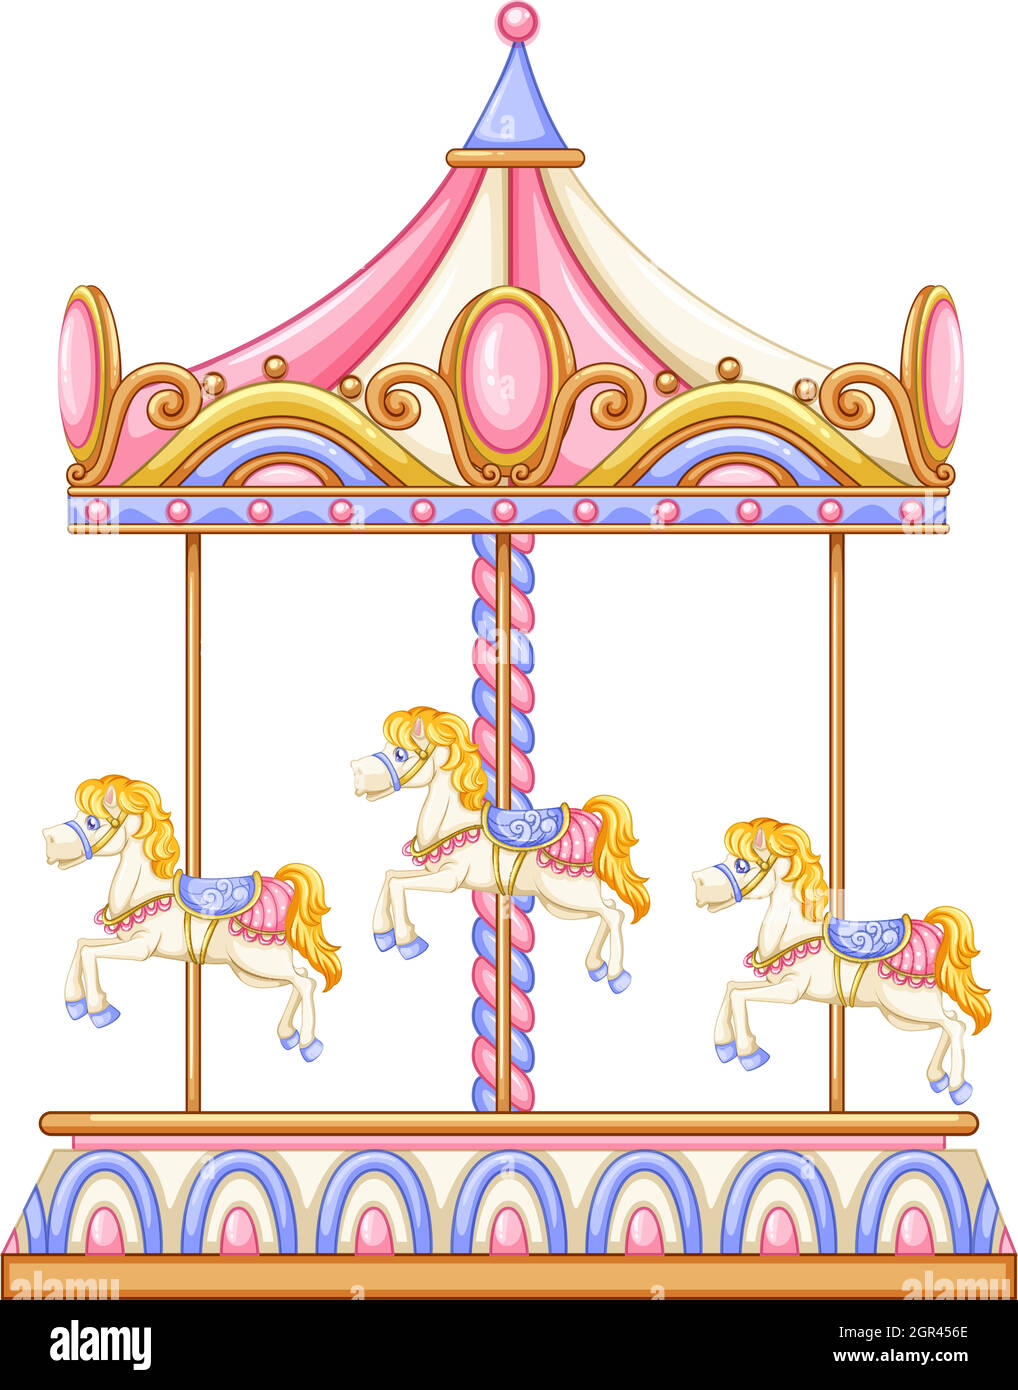 A merry-go-round rotating ride Stock Vector